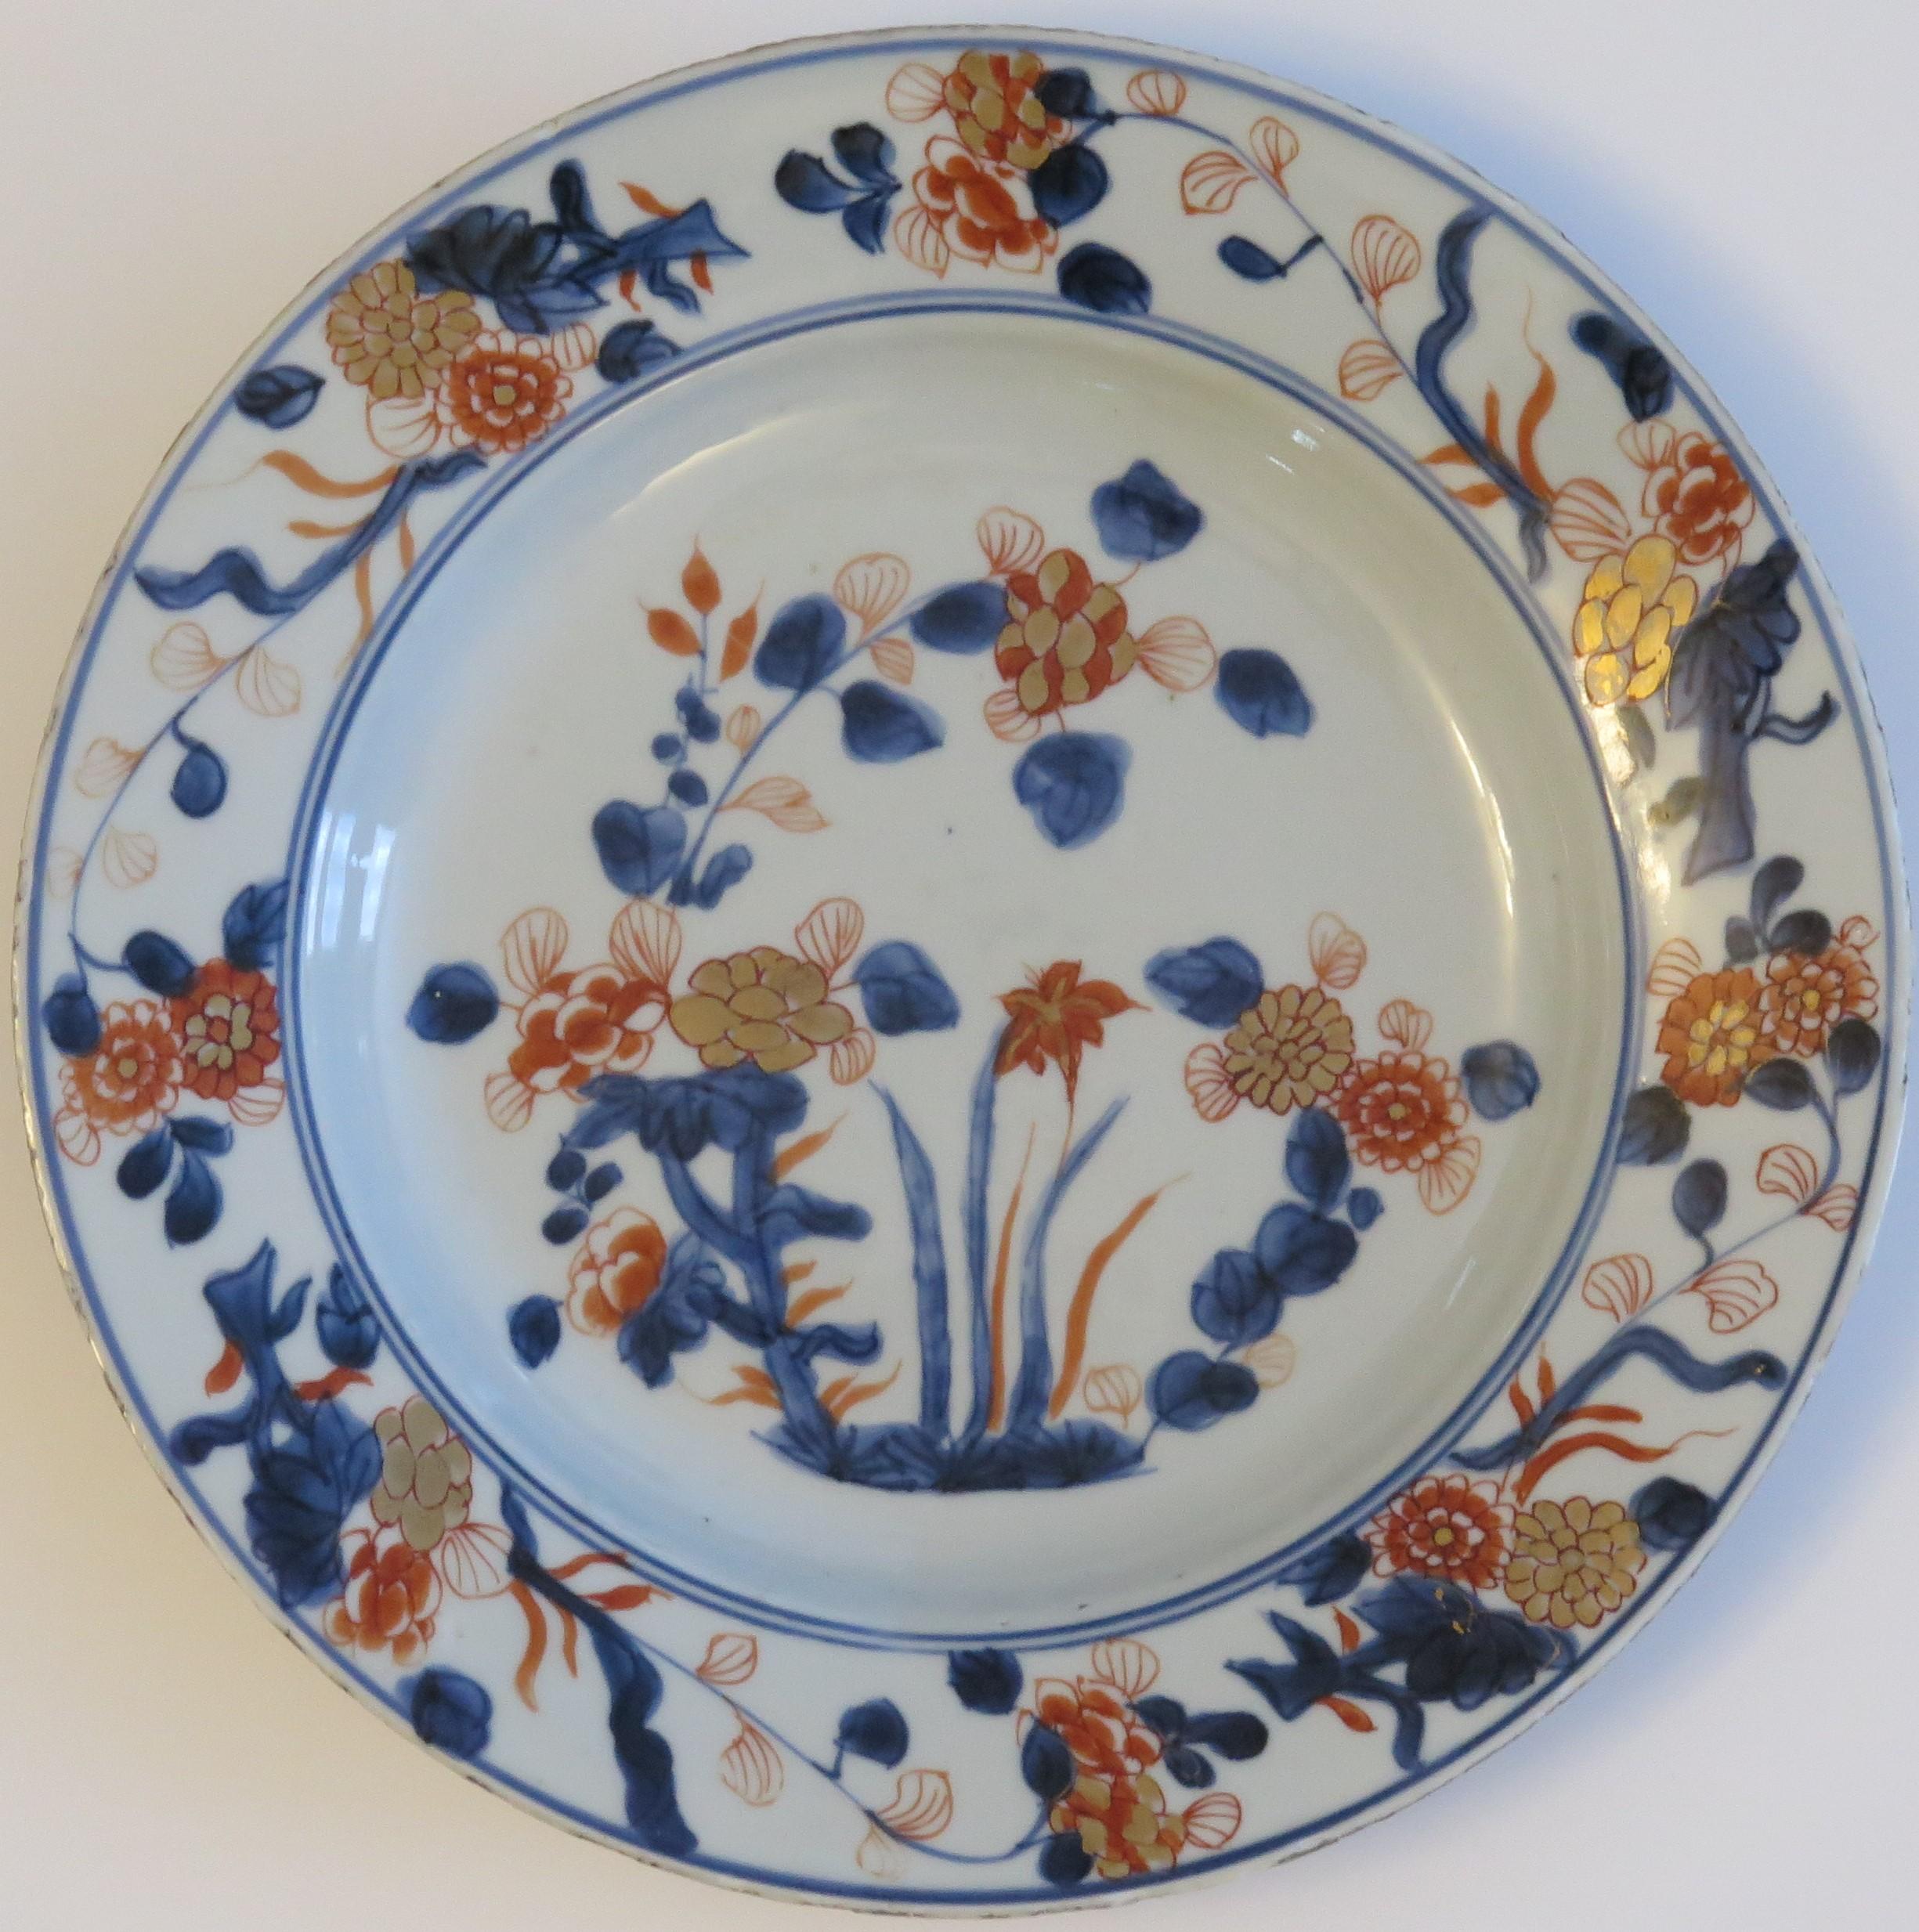 This is a beautifully hand painted Chinese Export porcelain Plate or Bowl from the Qing, Kangxi period, 1662-1722, fully marked to the base with the Kangxi period Artemisia Leaf mark within a double blue ring.

The plate is of dinner plate size,